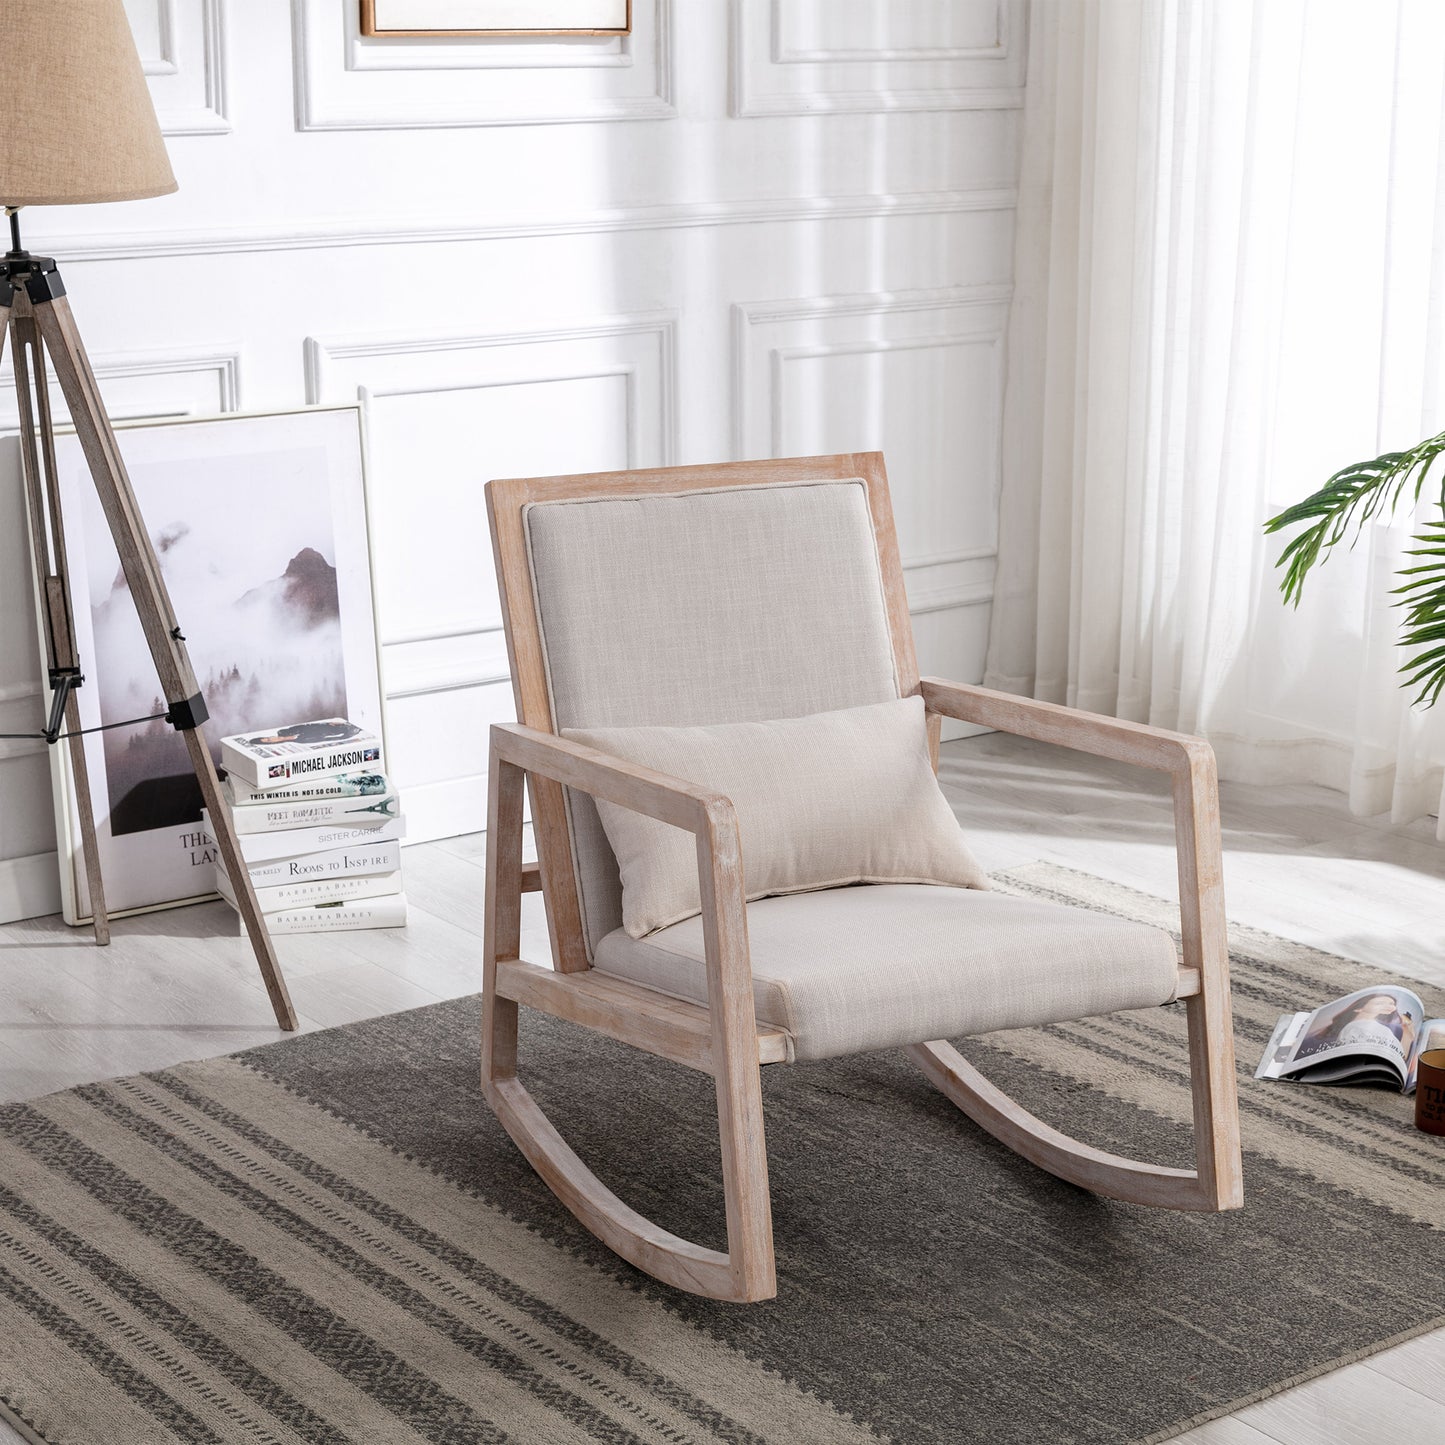 KOY Collection Solid rubber wood linen fabric antique white wash painting rocking chair with pillow